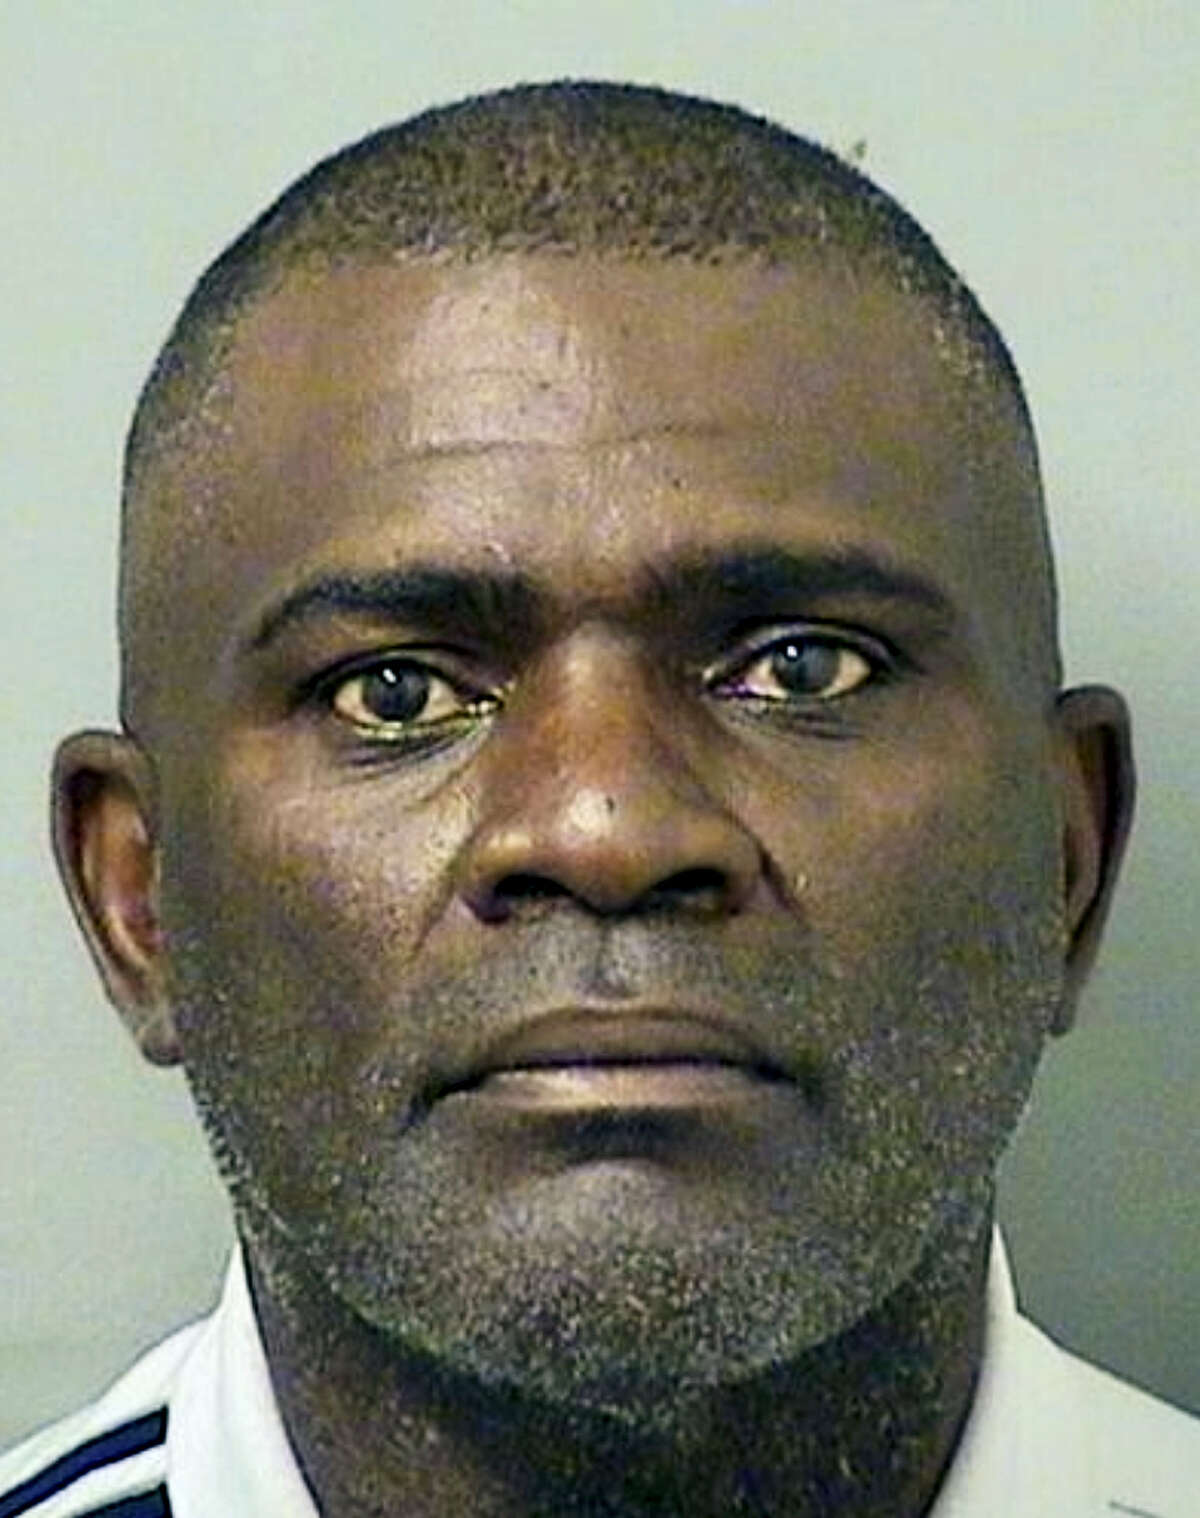 This booking photo provided by the Palm Beach County Sheriff’s Department shows ex-NFL football player Lawrence Taylor, who was arrested Friday on a DUI charge.